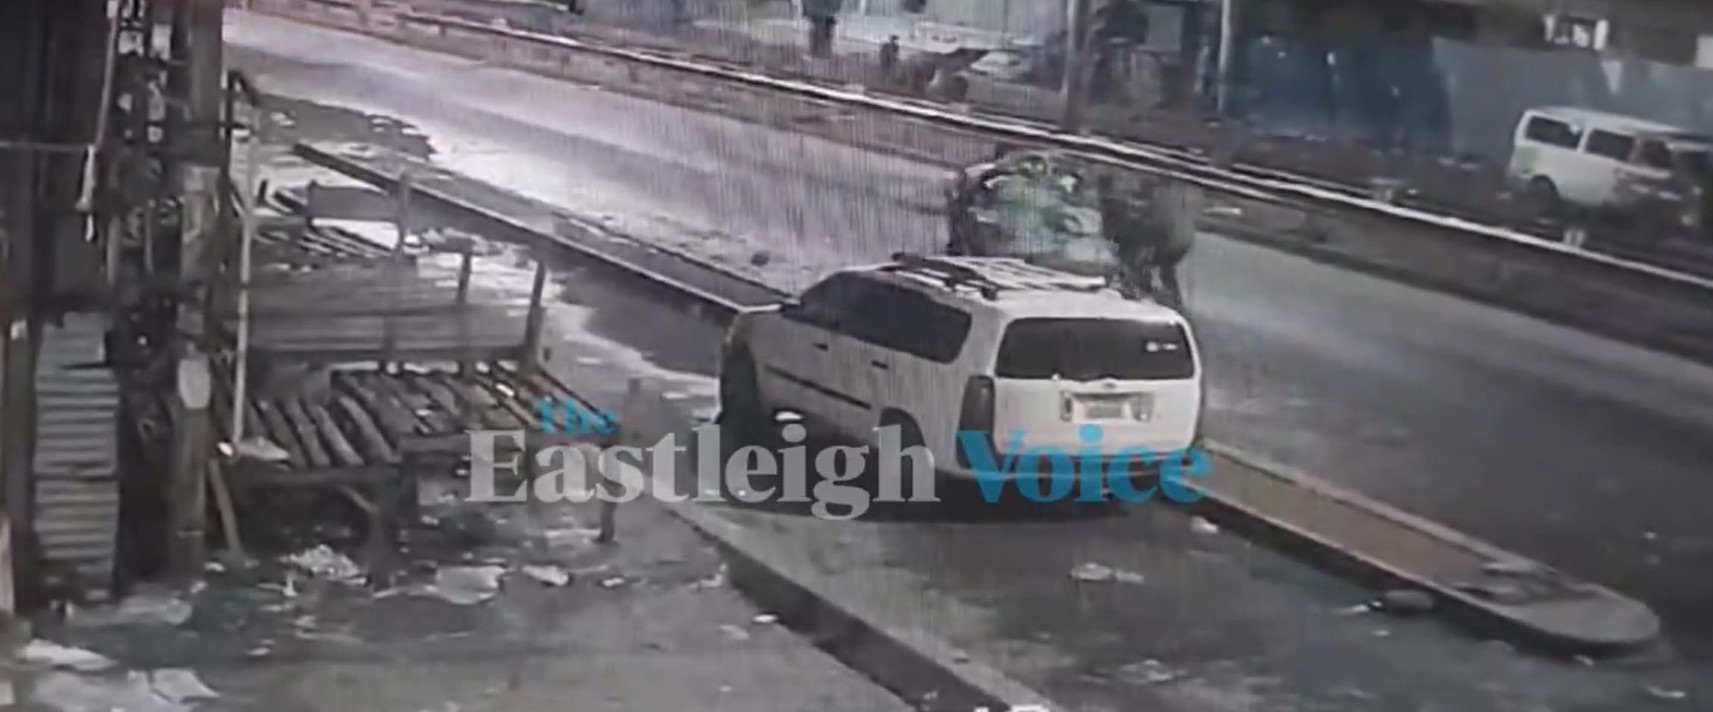 Uproar as CCTV captures five dumping garbage in Eastleigh at night [VIDEO]